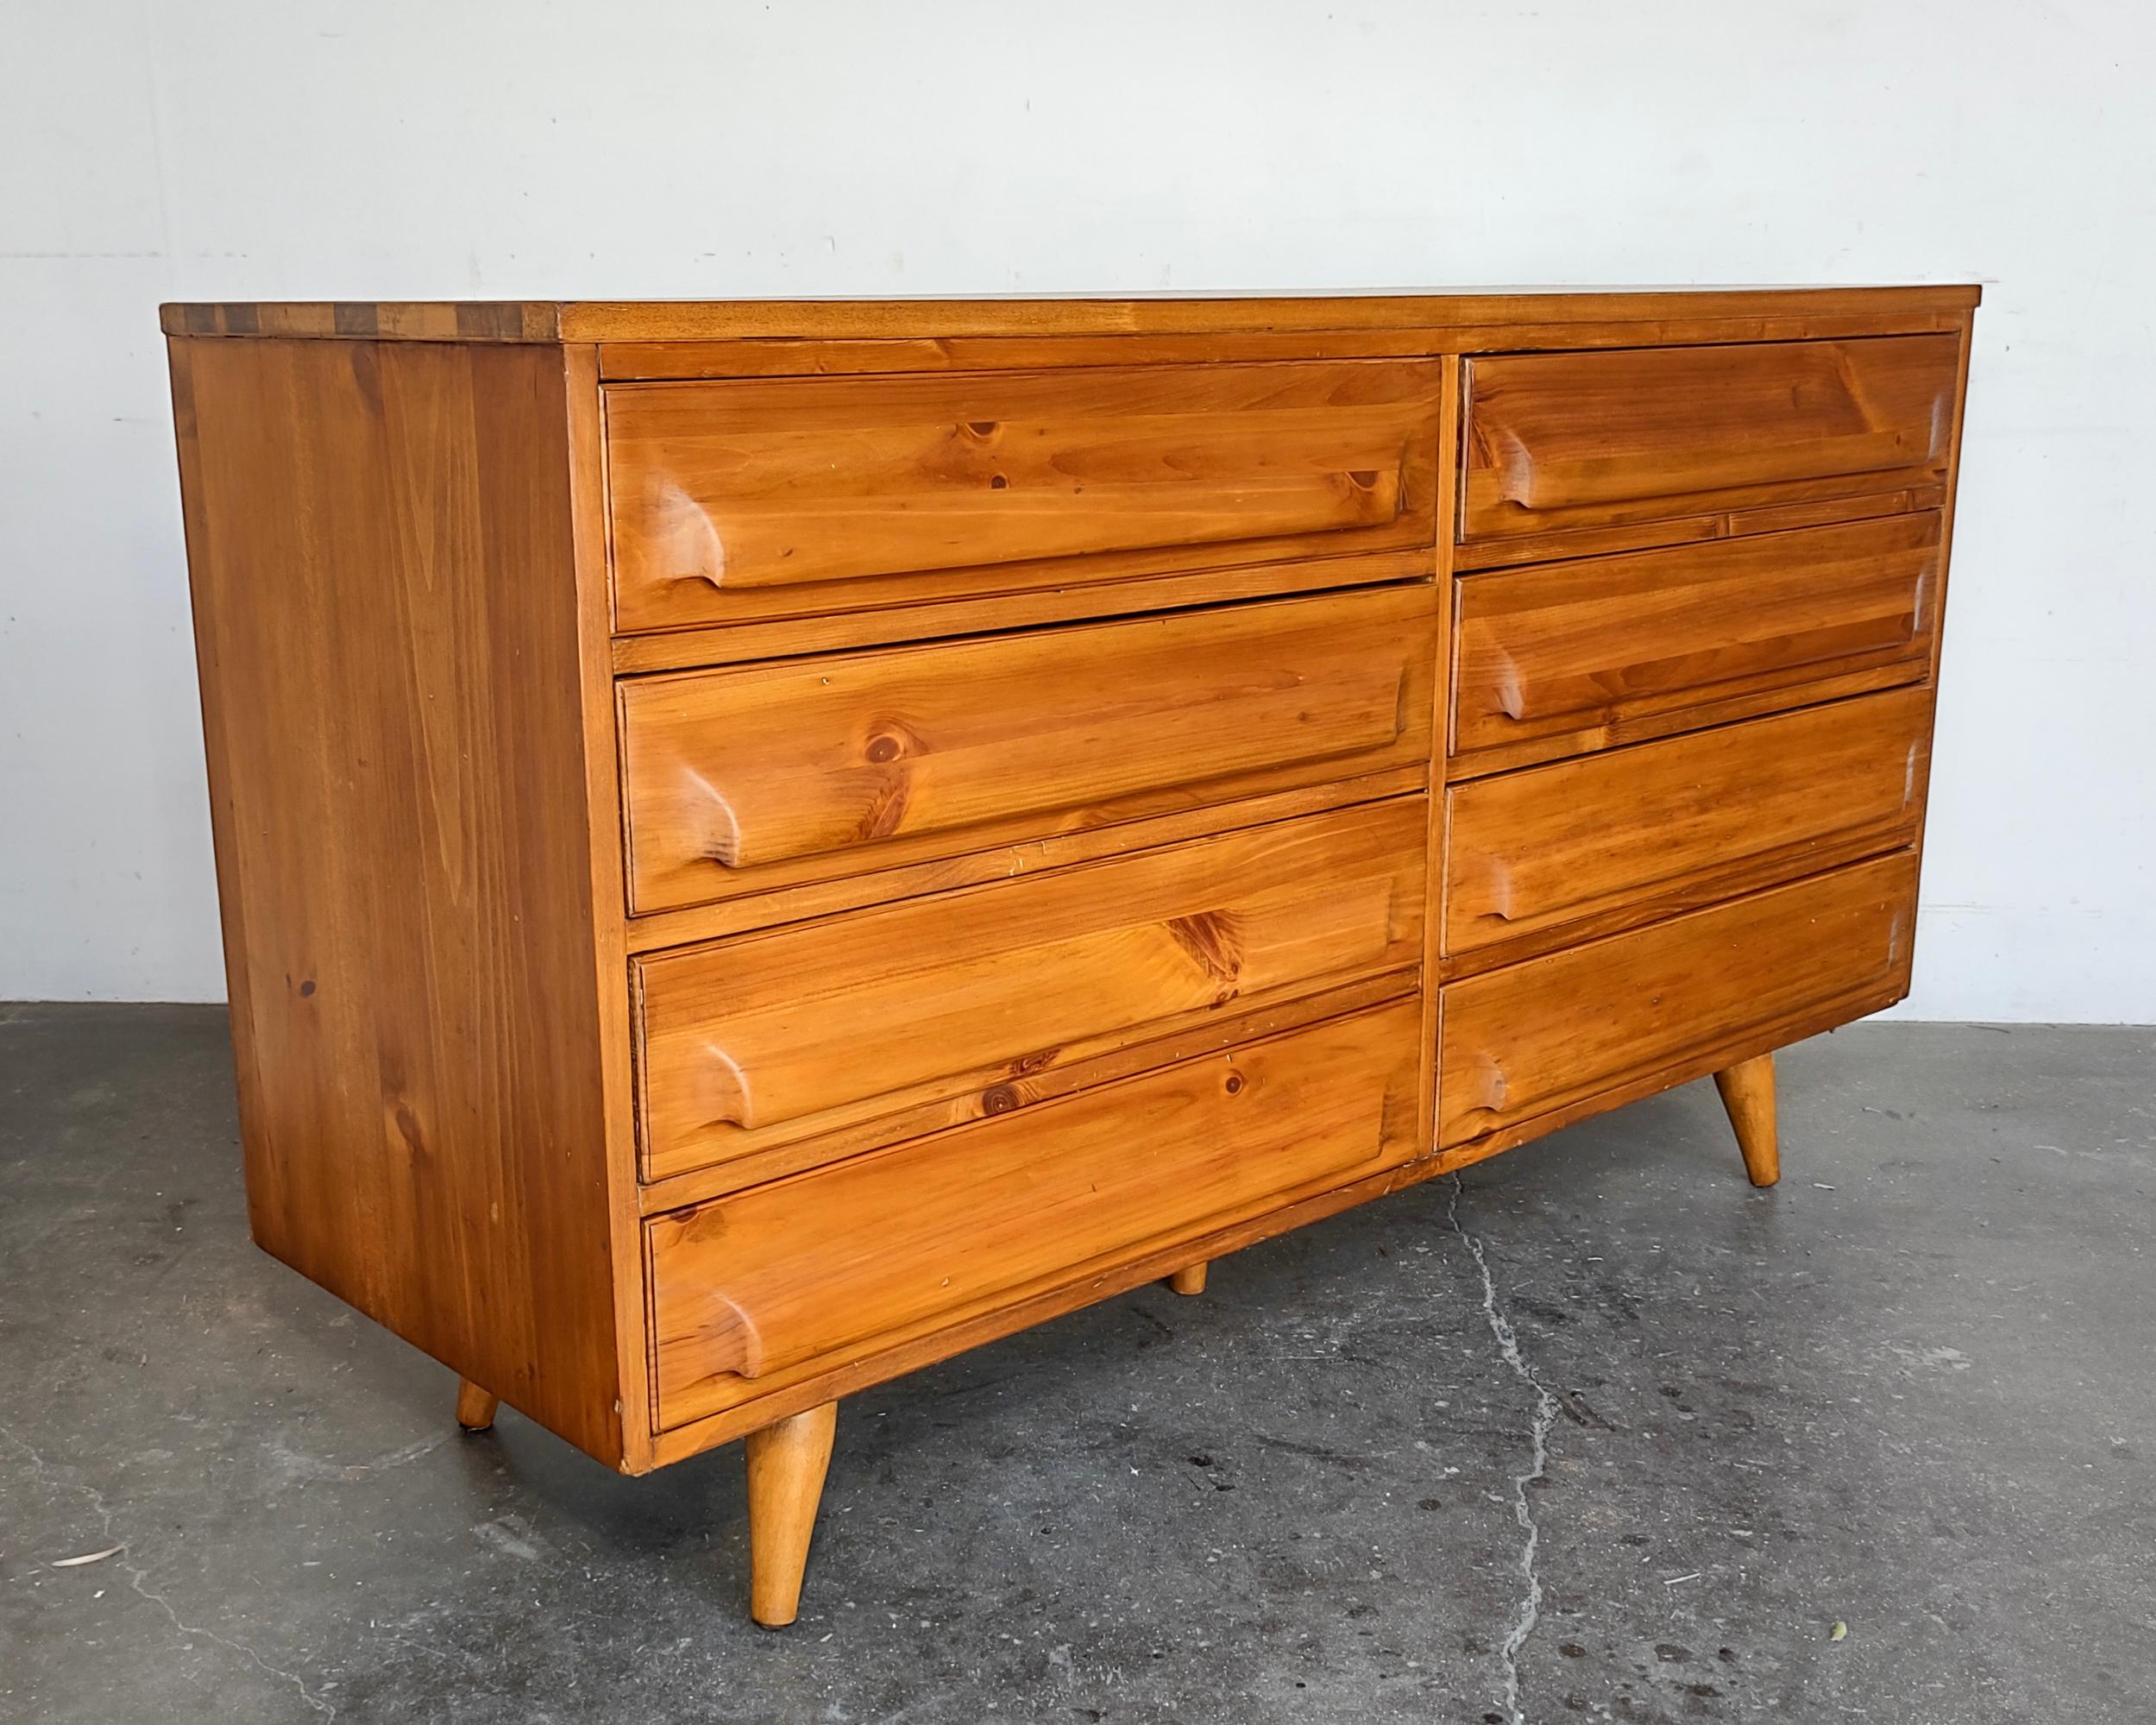 Fully refinished hand-burnished pine lowboy dresser with eight mahogany-lined drawers and dovetail joinery. Drawer faces and legs are sculpted from solid pine and the case is solid wood construction with pine veneer. Overall excellent vintage